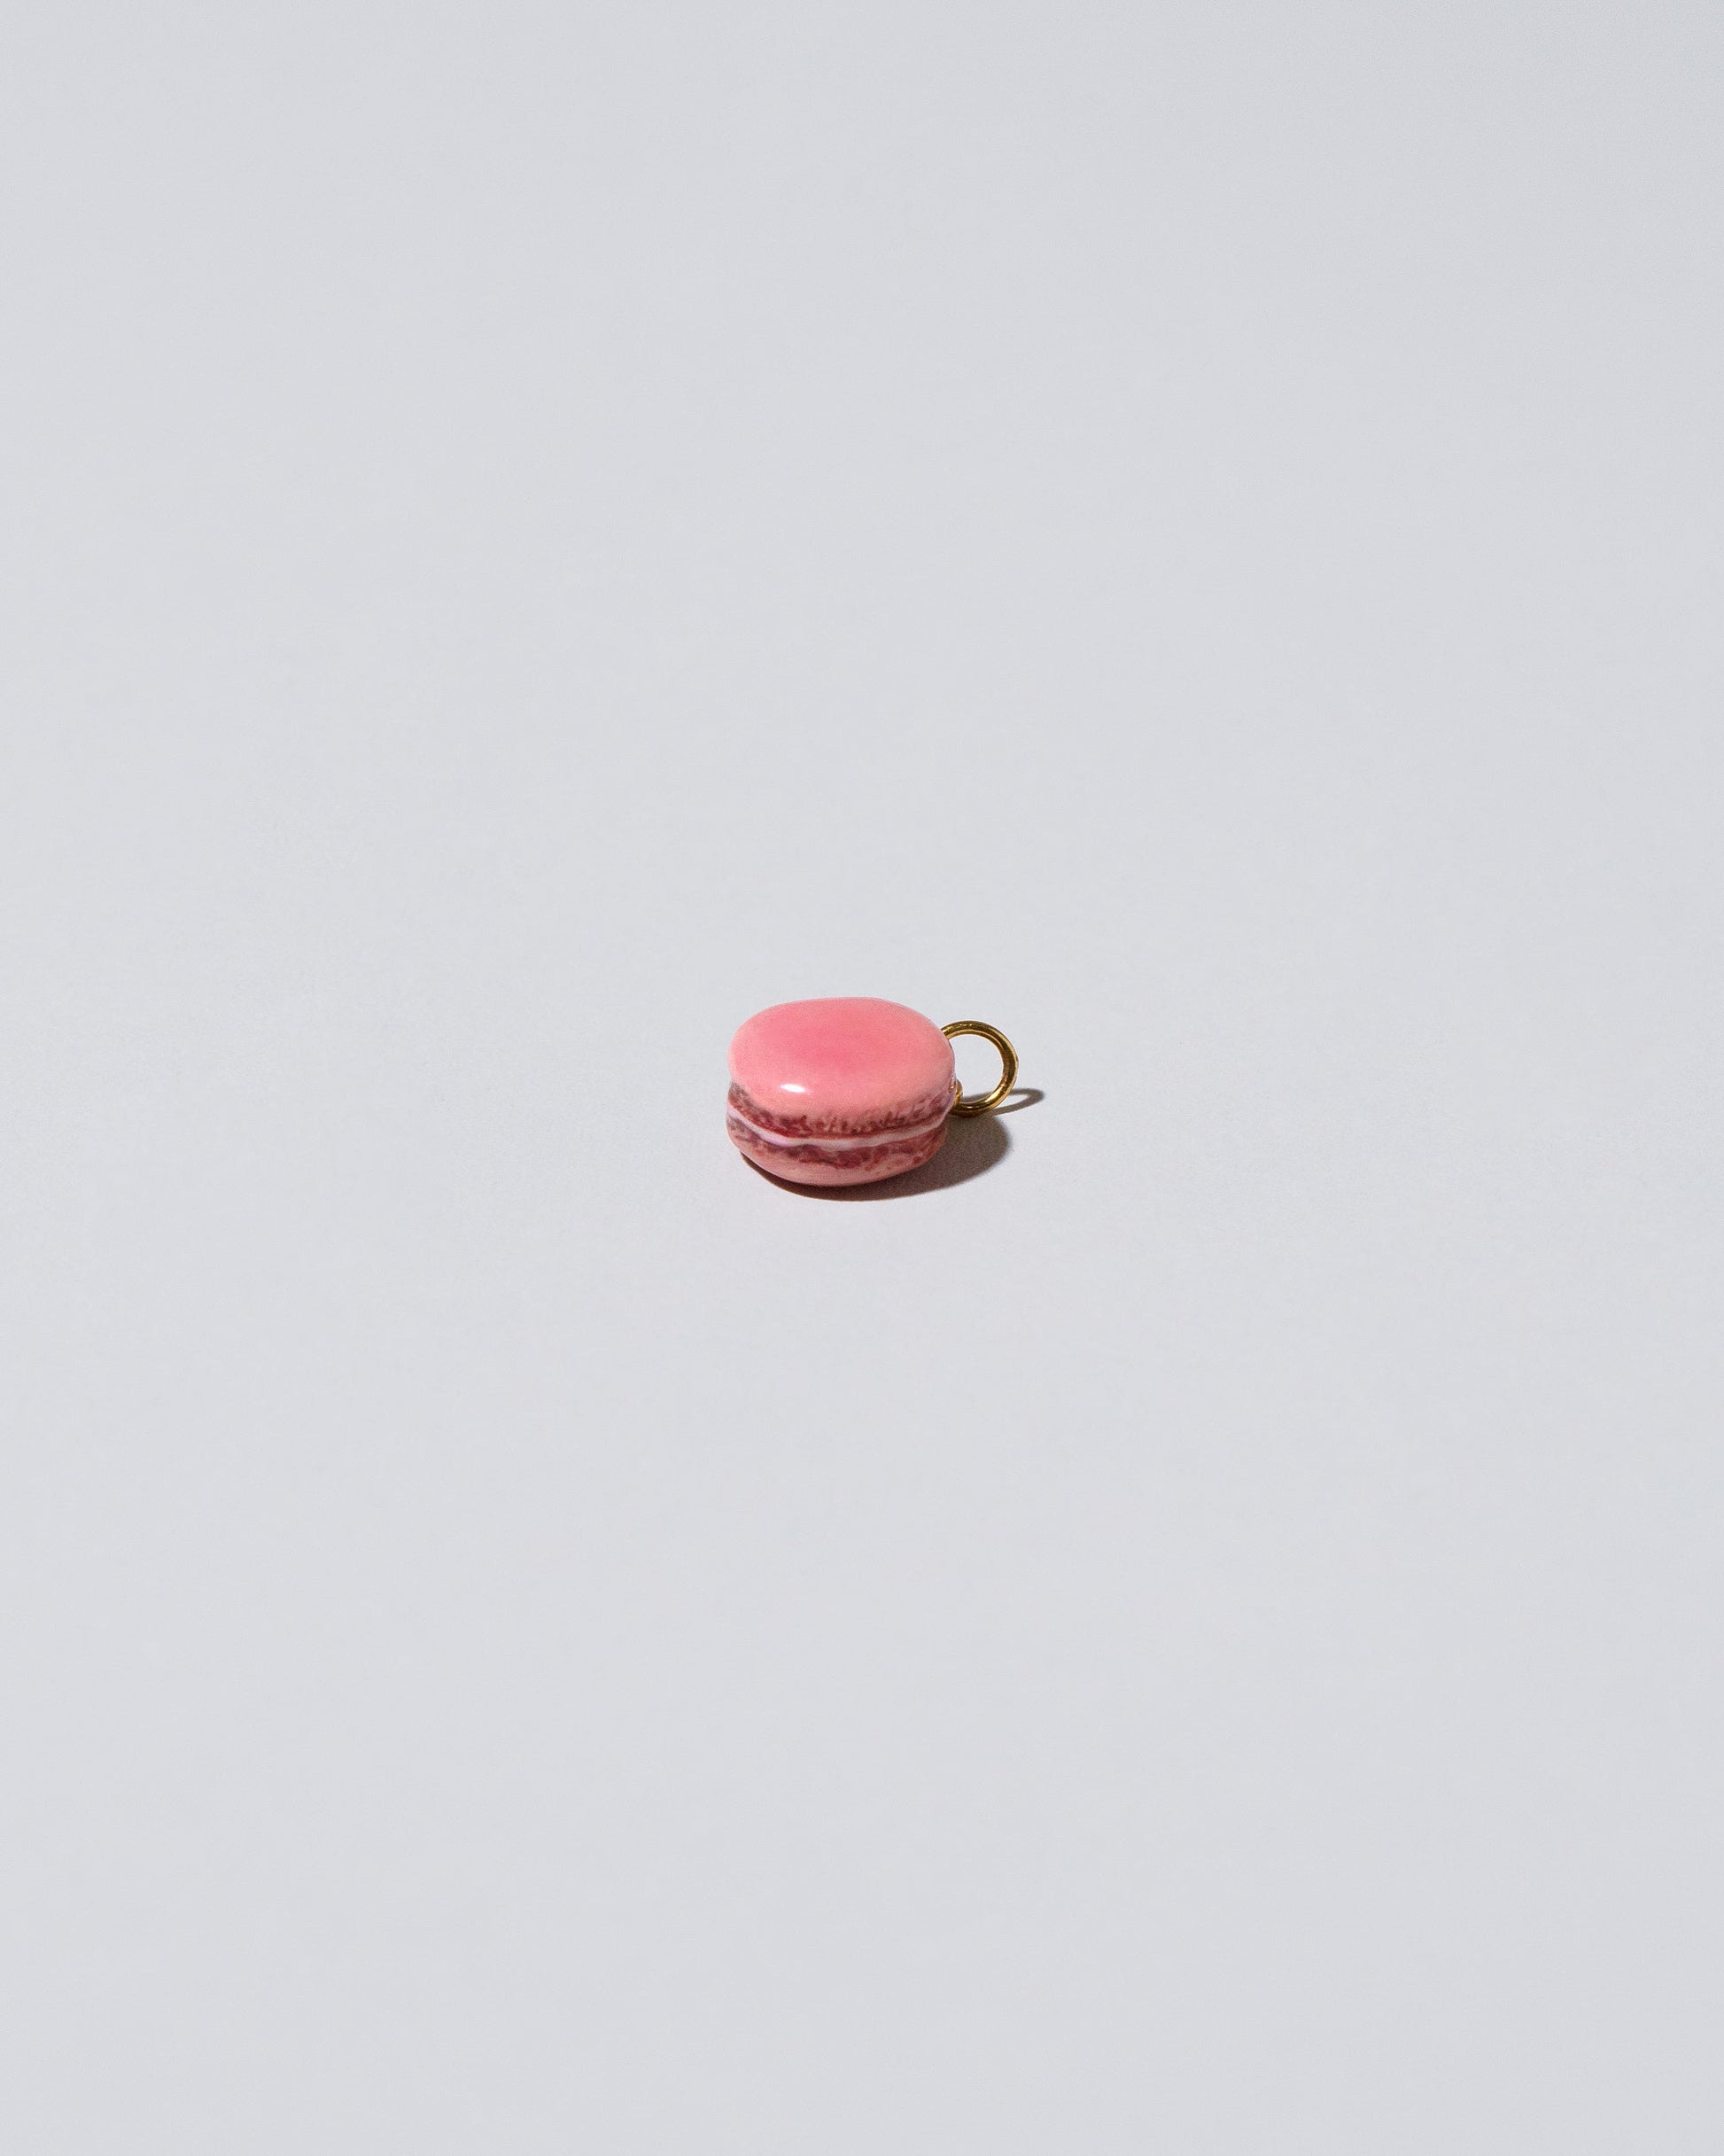 Product photo of Macaron Charm in rose on light color background